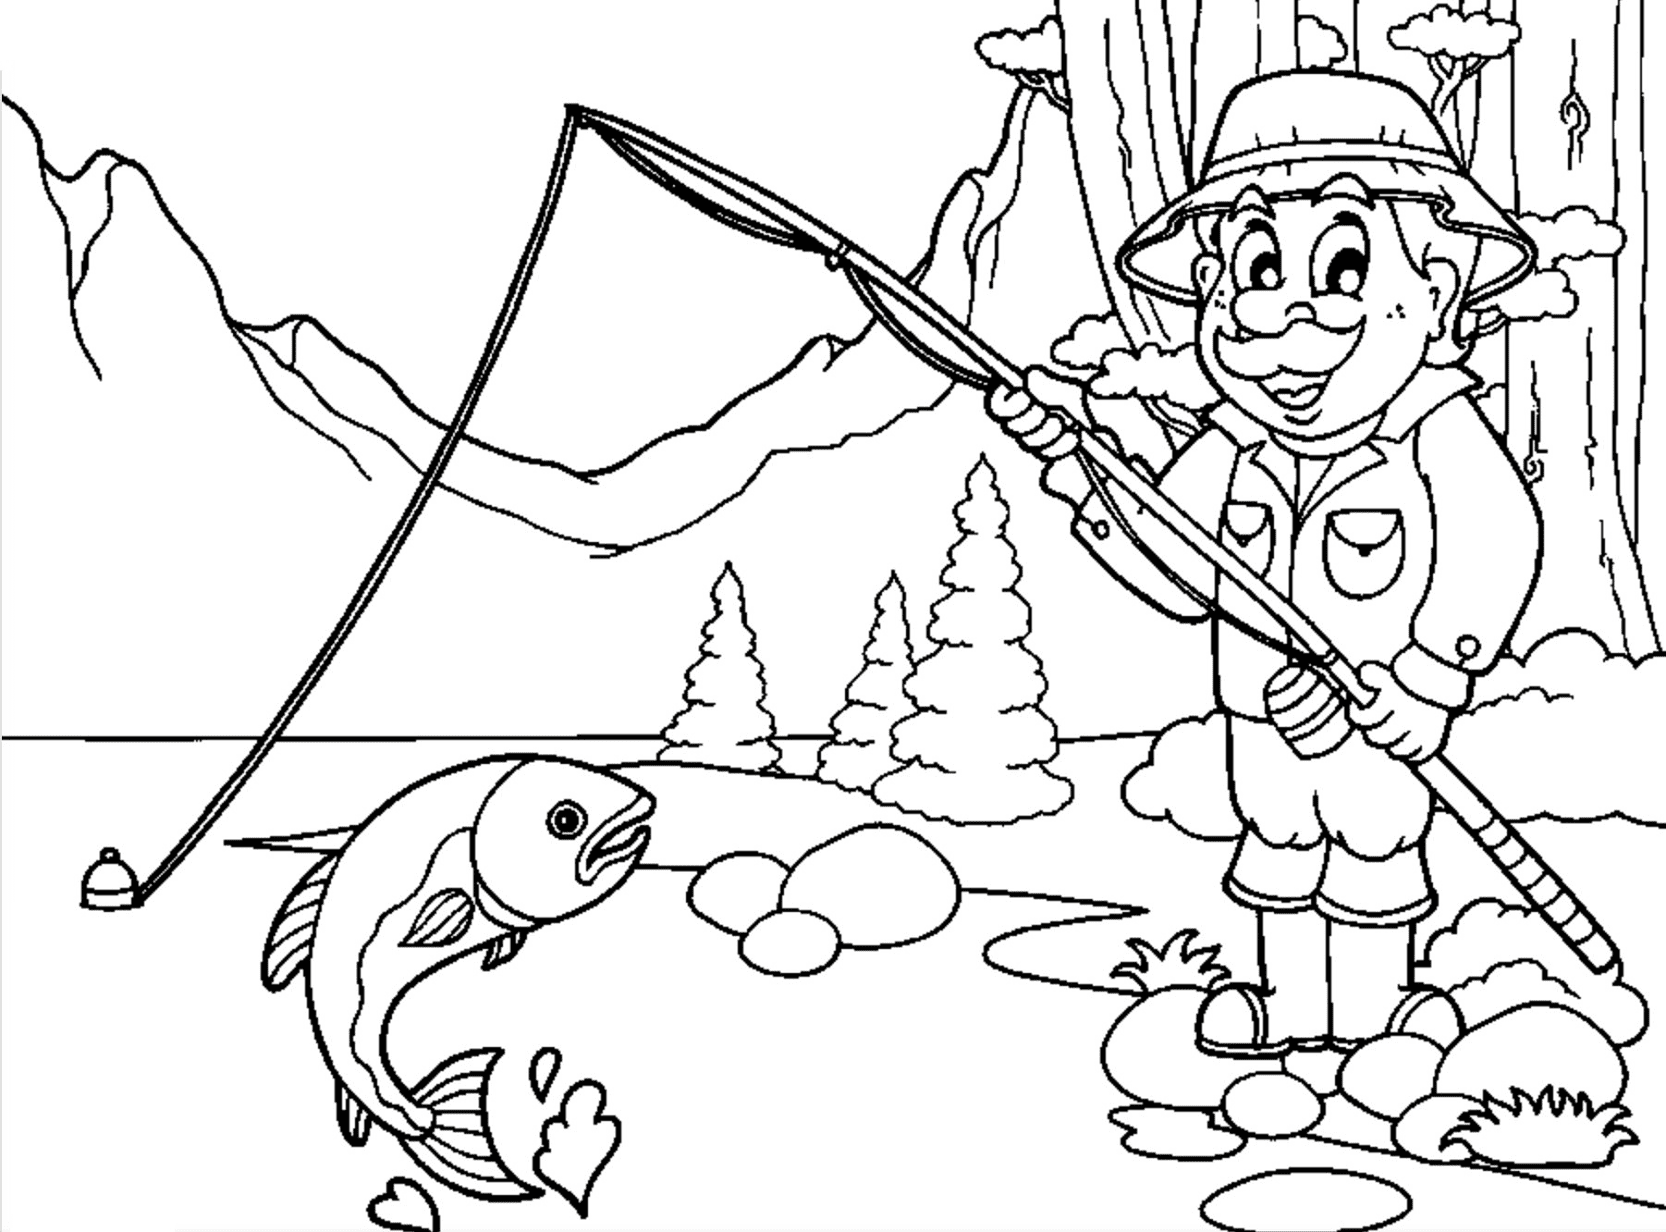 Fisherman On A Lake Landscape Coloring Pages